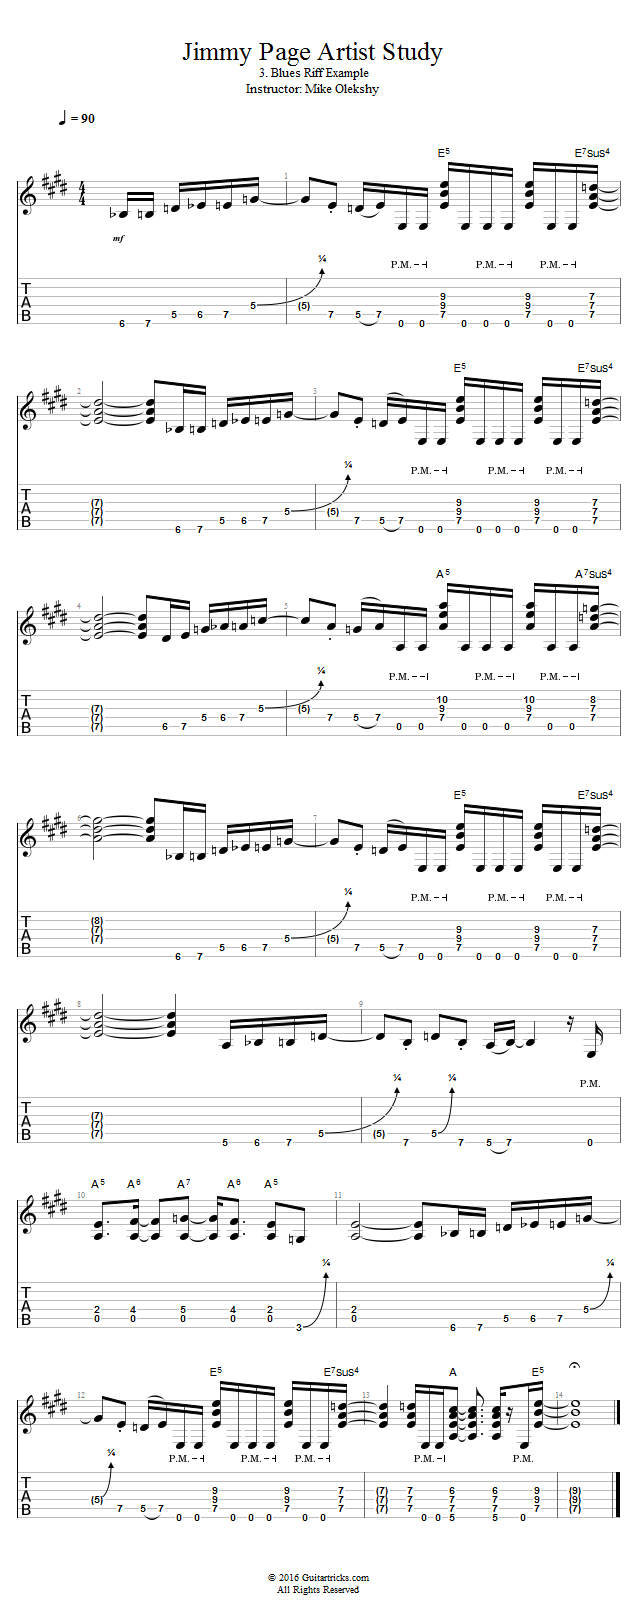 Blues Riff Example song notation